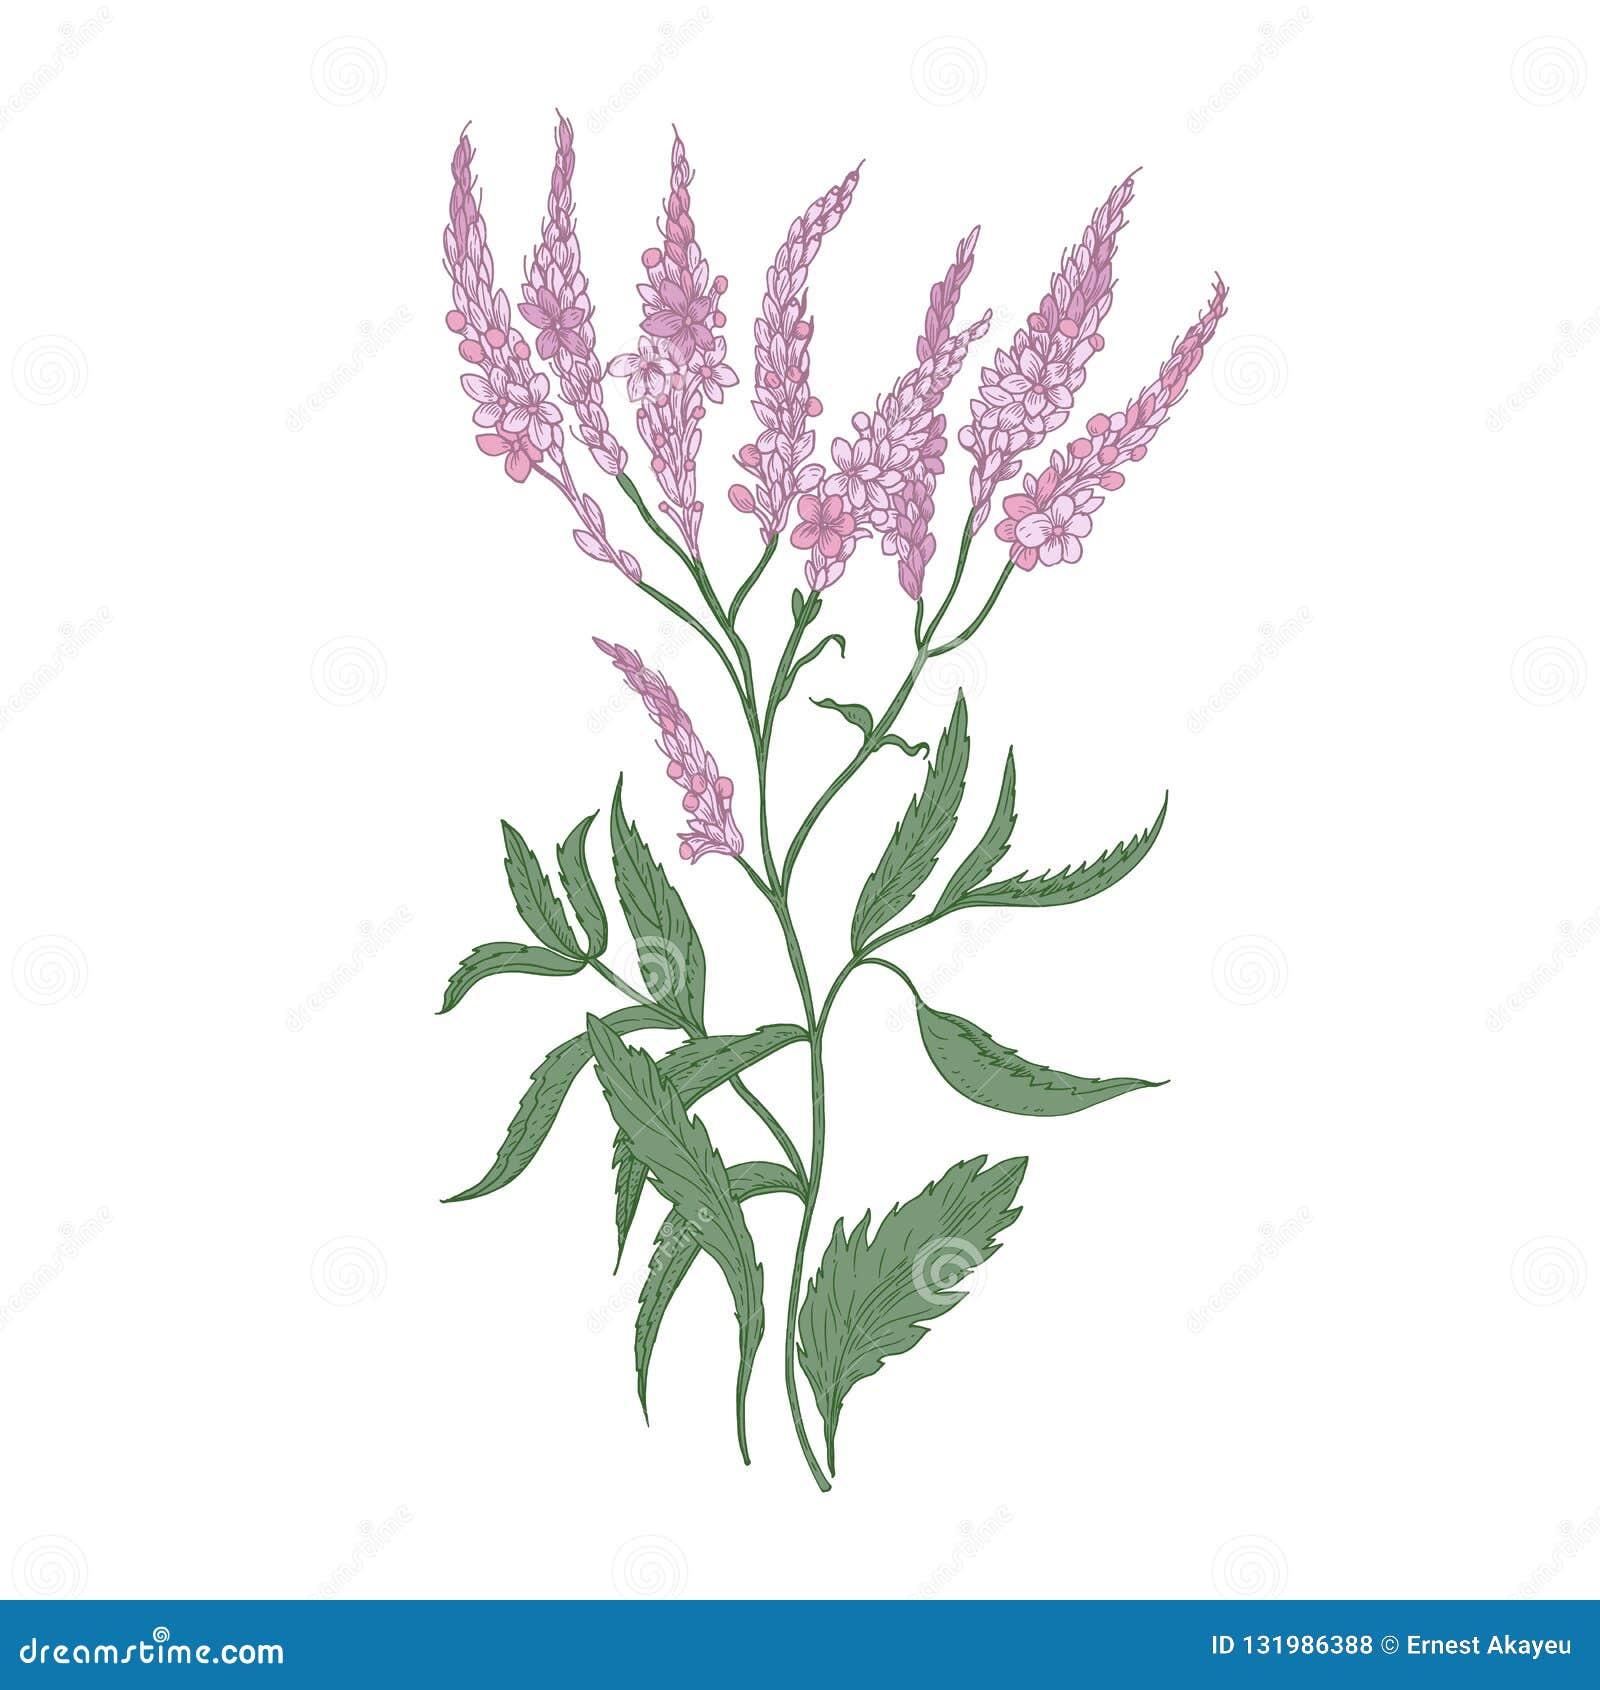 Common Verbena Flowers Isolated On White Background Detailed Drawing Of Wild Perennial Flowering Herb Used As Medicinal Stock Vector Illustration Of Herb Flower 131986388